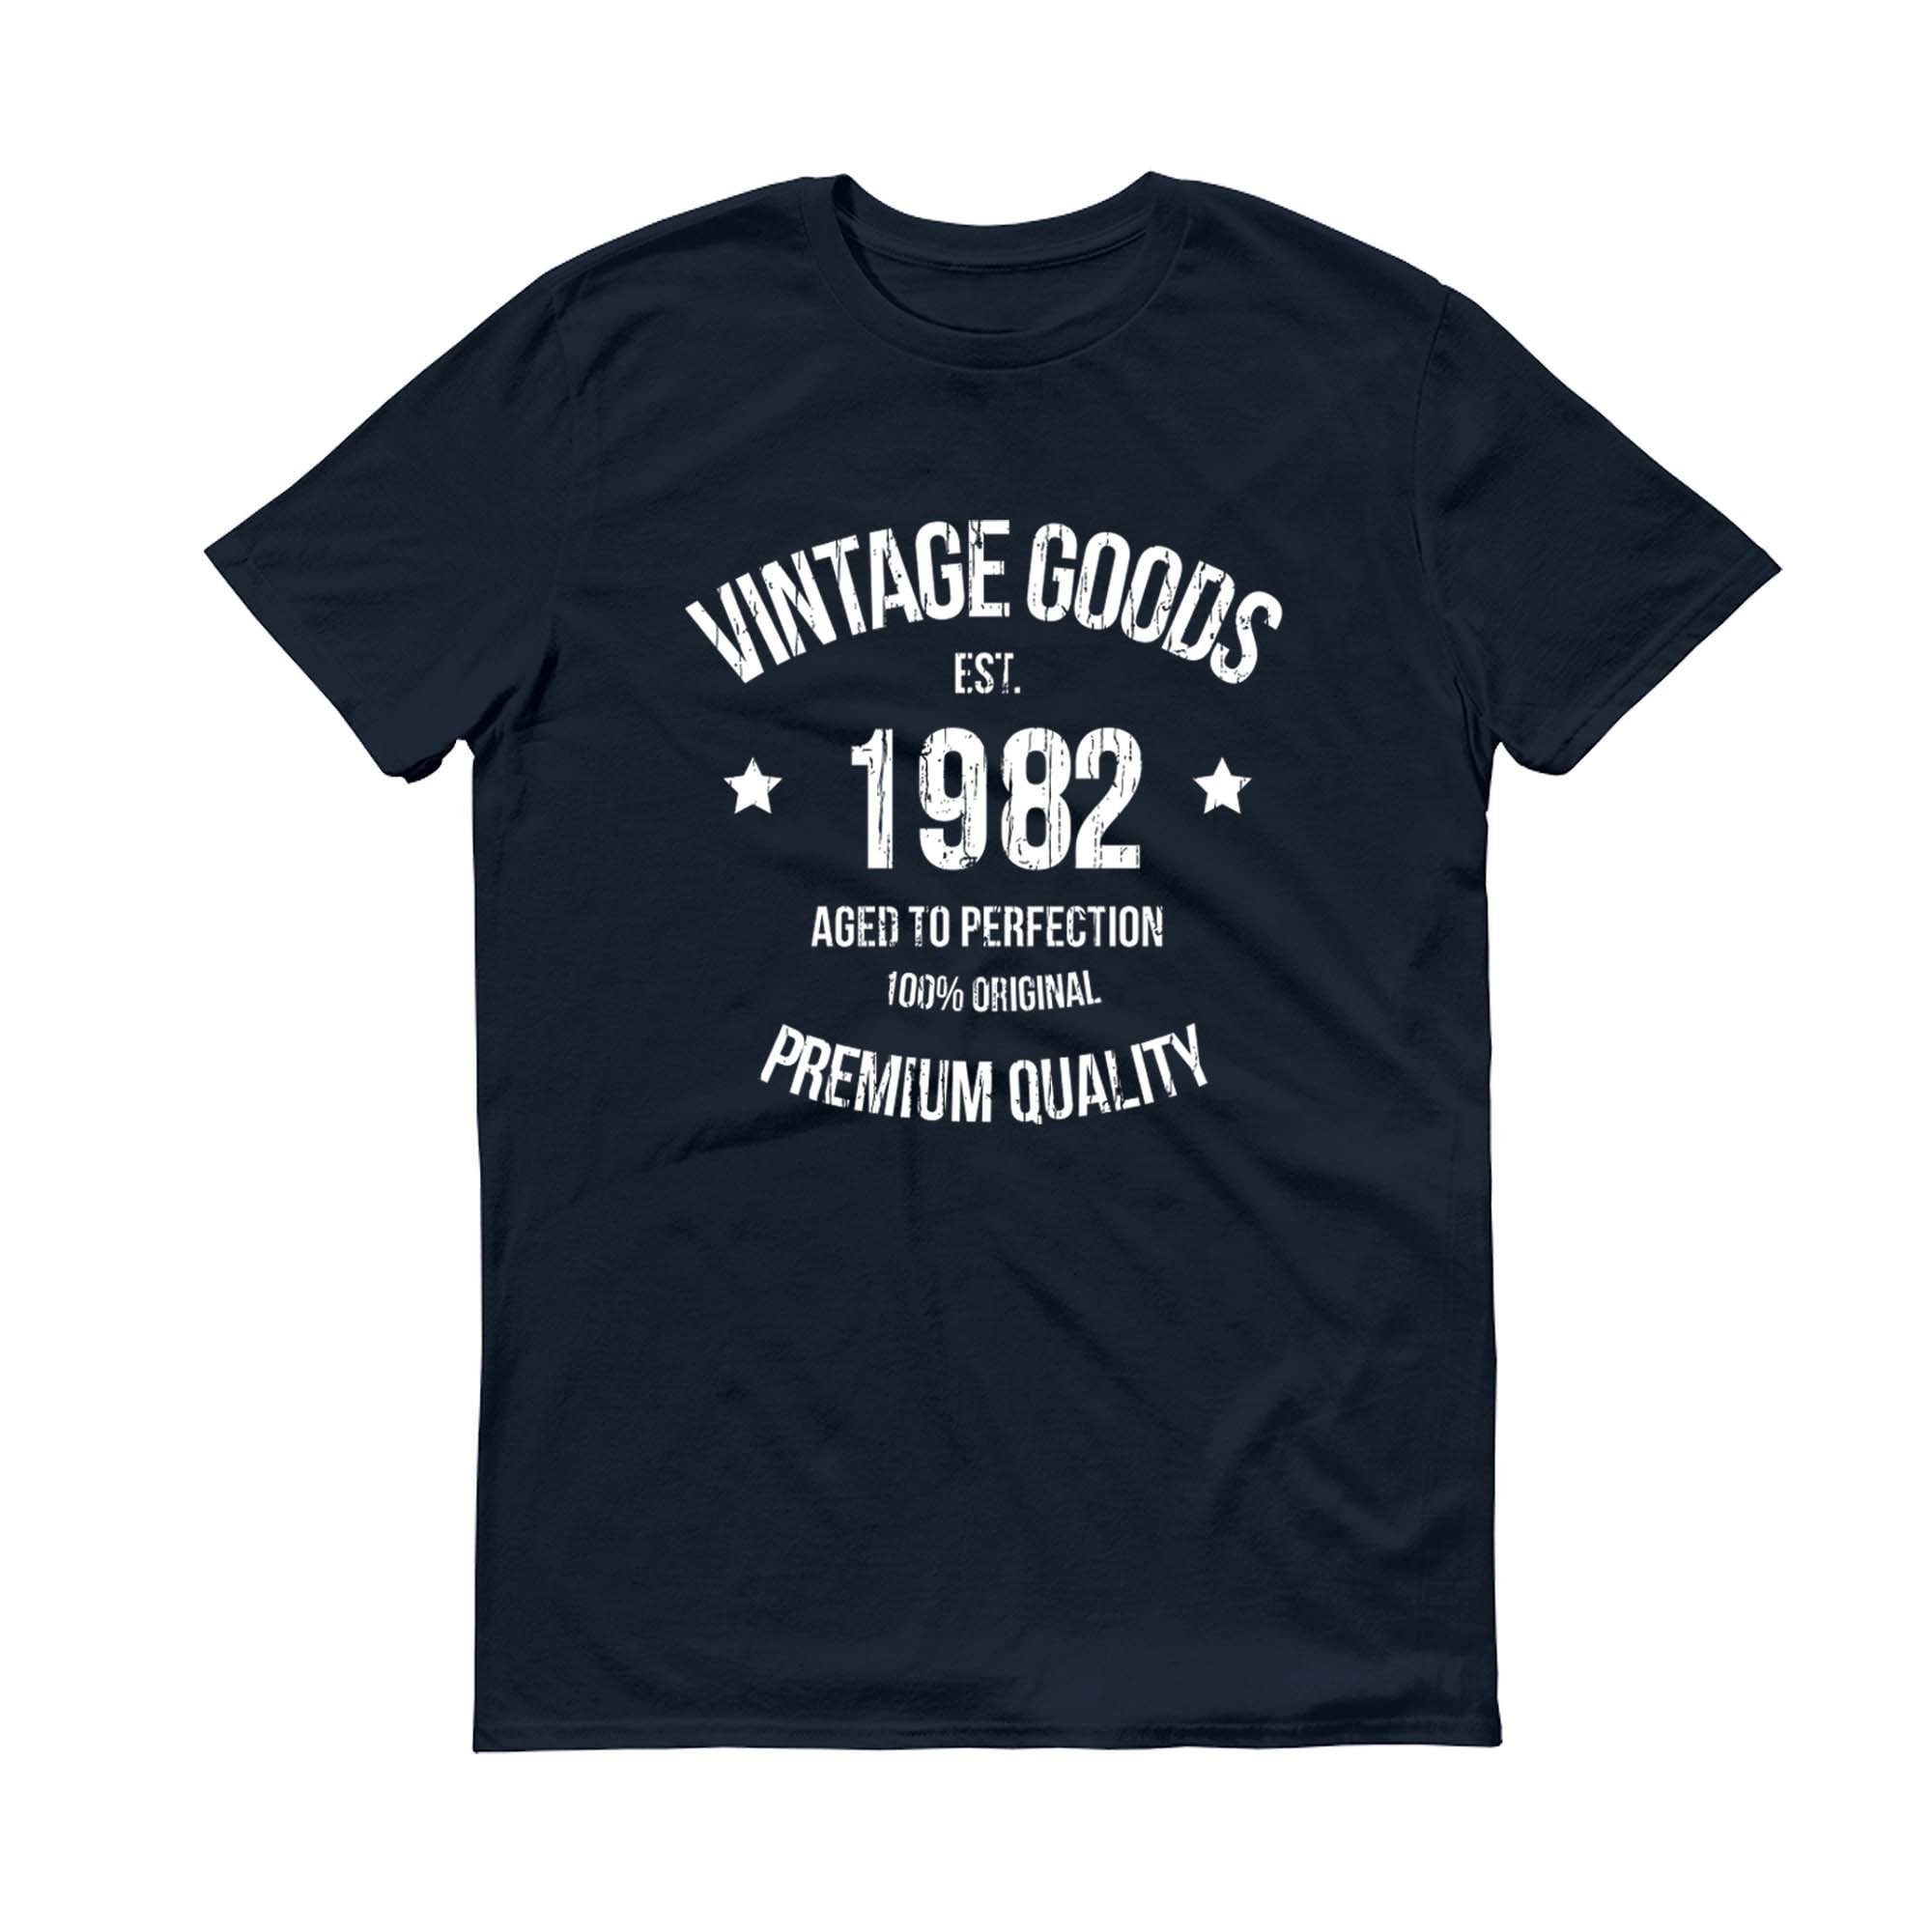 Clothing Gender-Neutral Adult Clothing Tops & Tees T-shirts 40th Birthday Gifts For Dad 40th Birthday T Shirt 40th Gift Vintage 1982 Aged To Perfection Mens Organic TShirt 